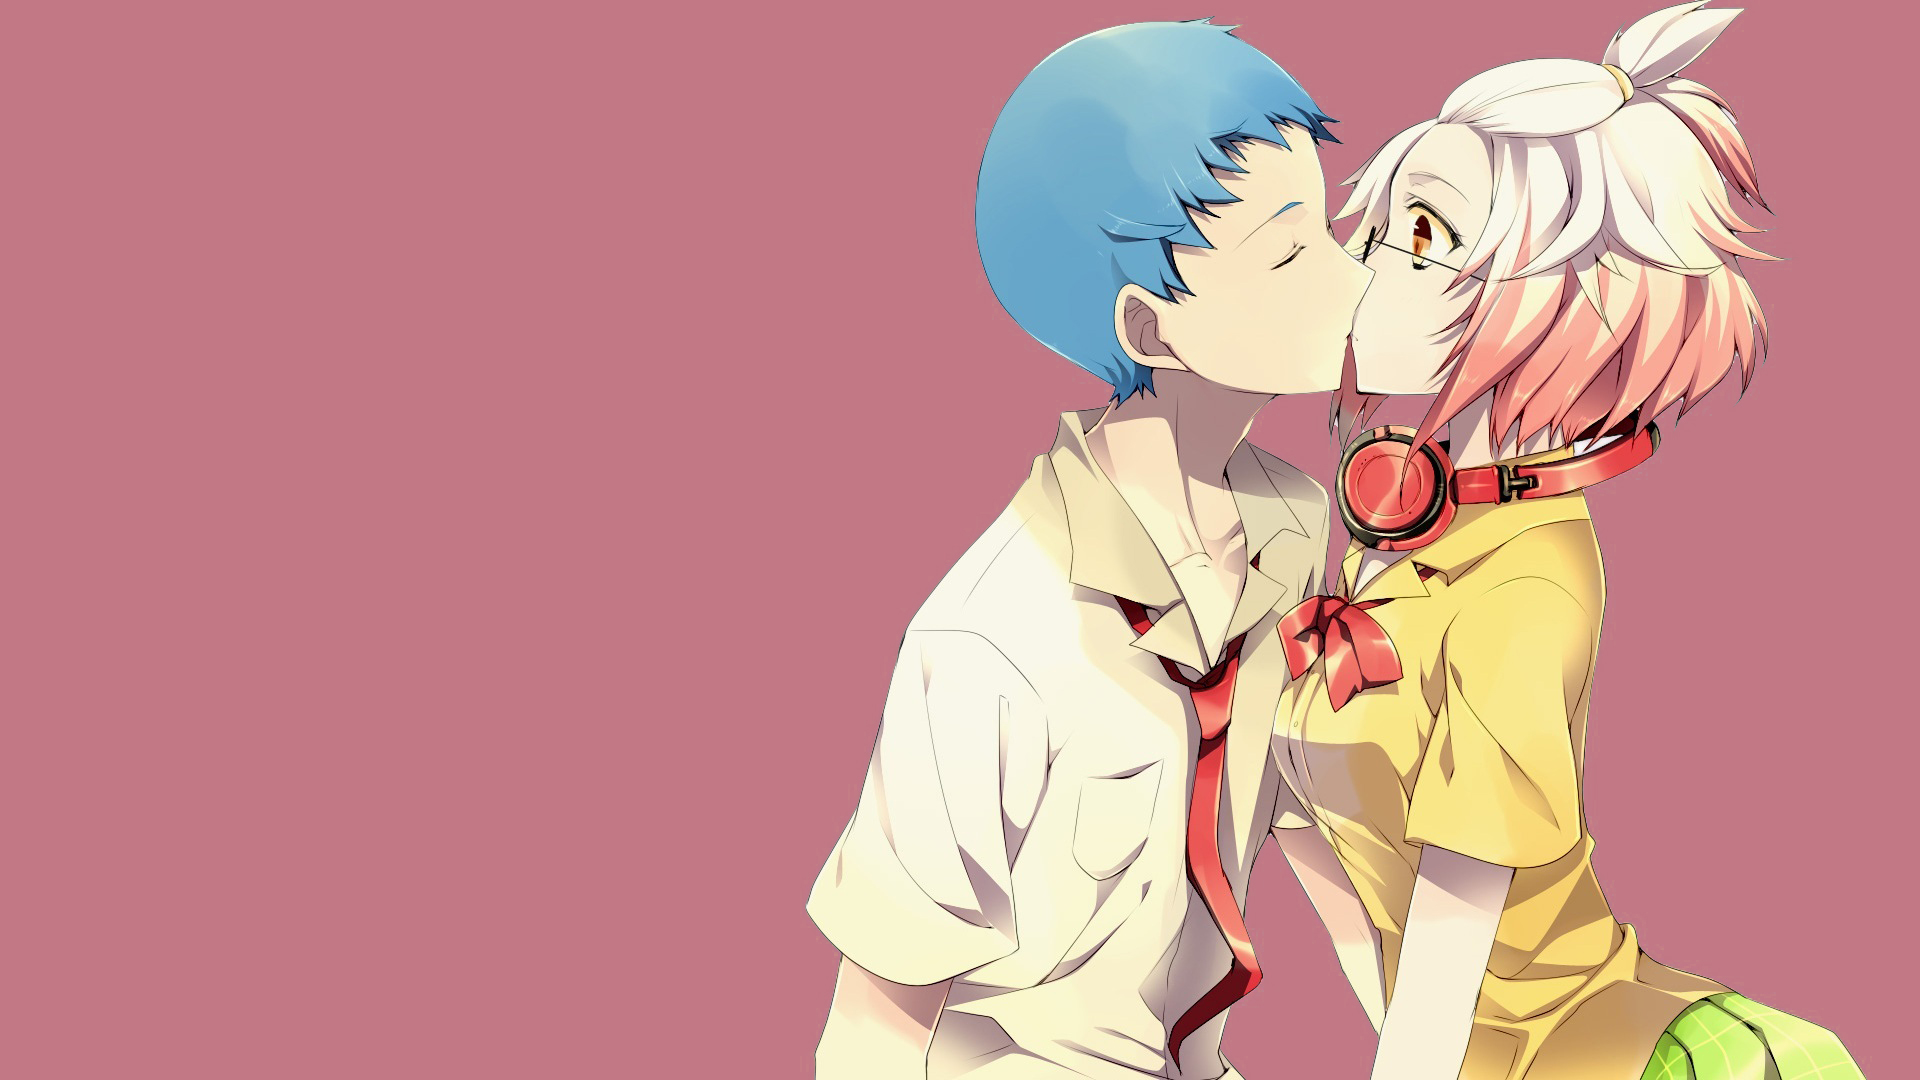 Sweet Couple Anime Wallpapers Wallpaper - Anime Couple With Glasses -  1920x1080 Wallpaper 